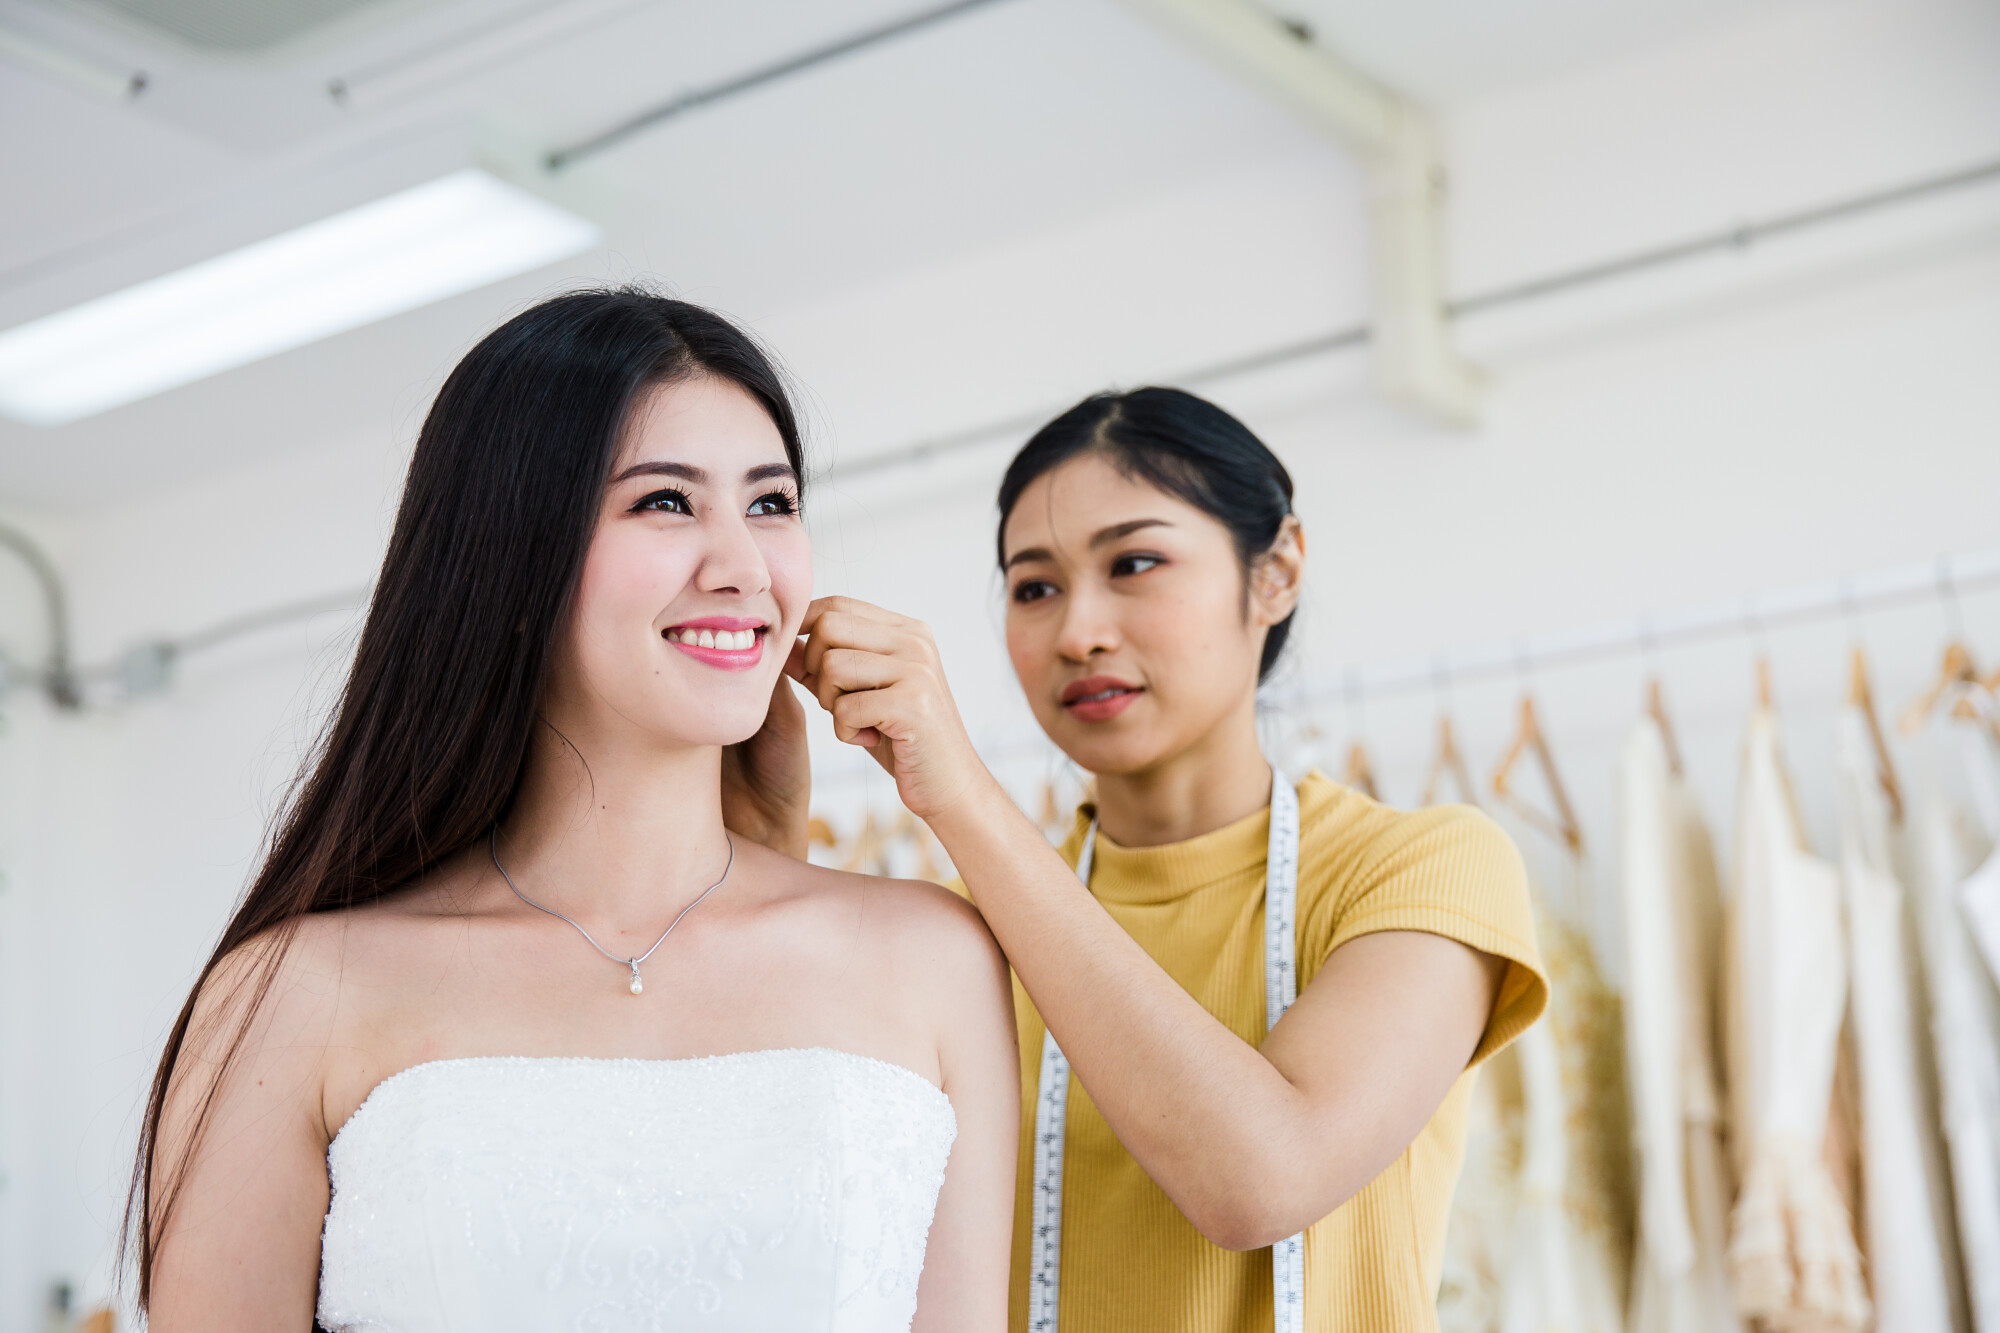 3 Tips for Finding Affordable Bridal Services